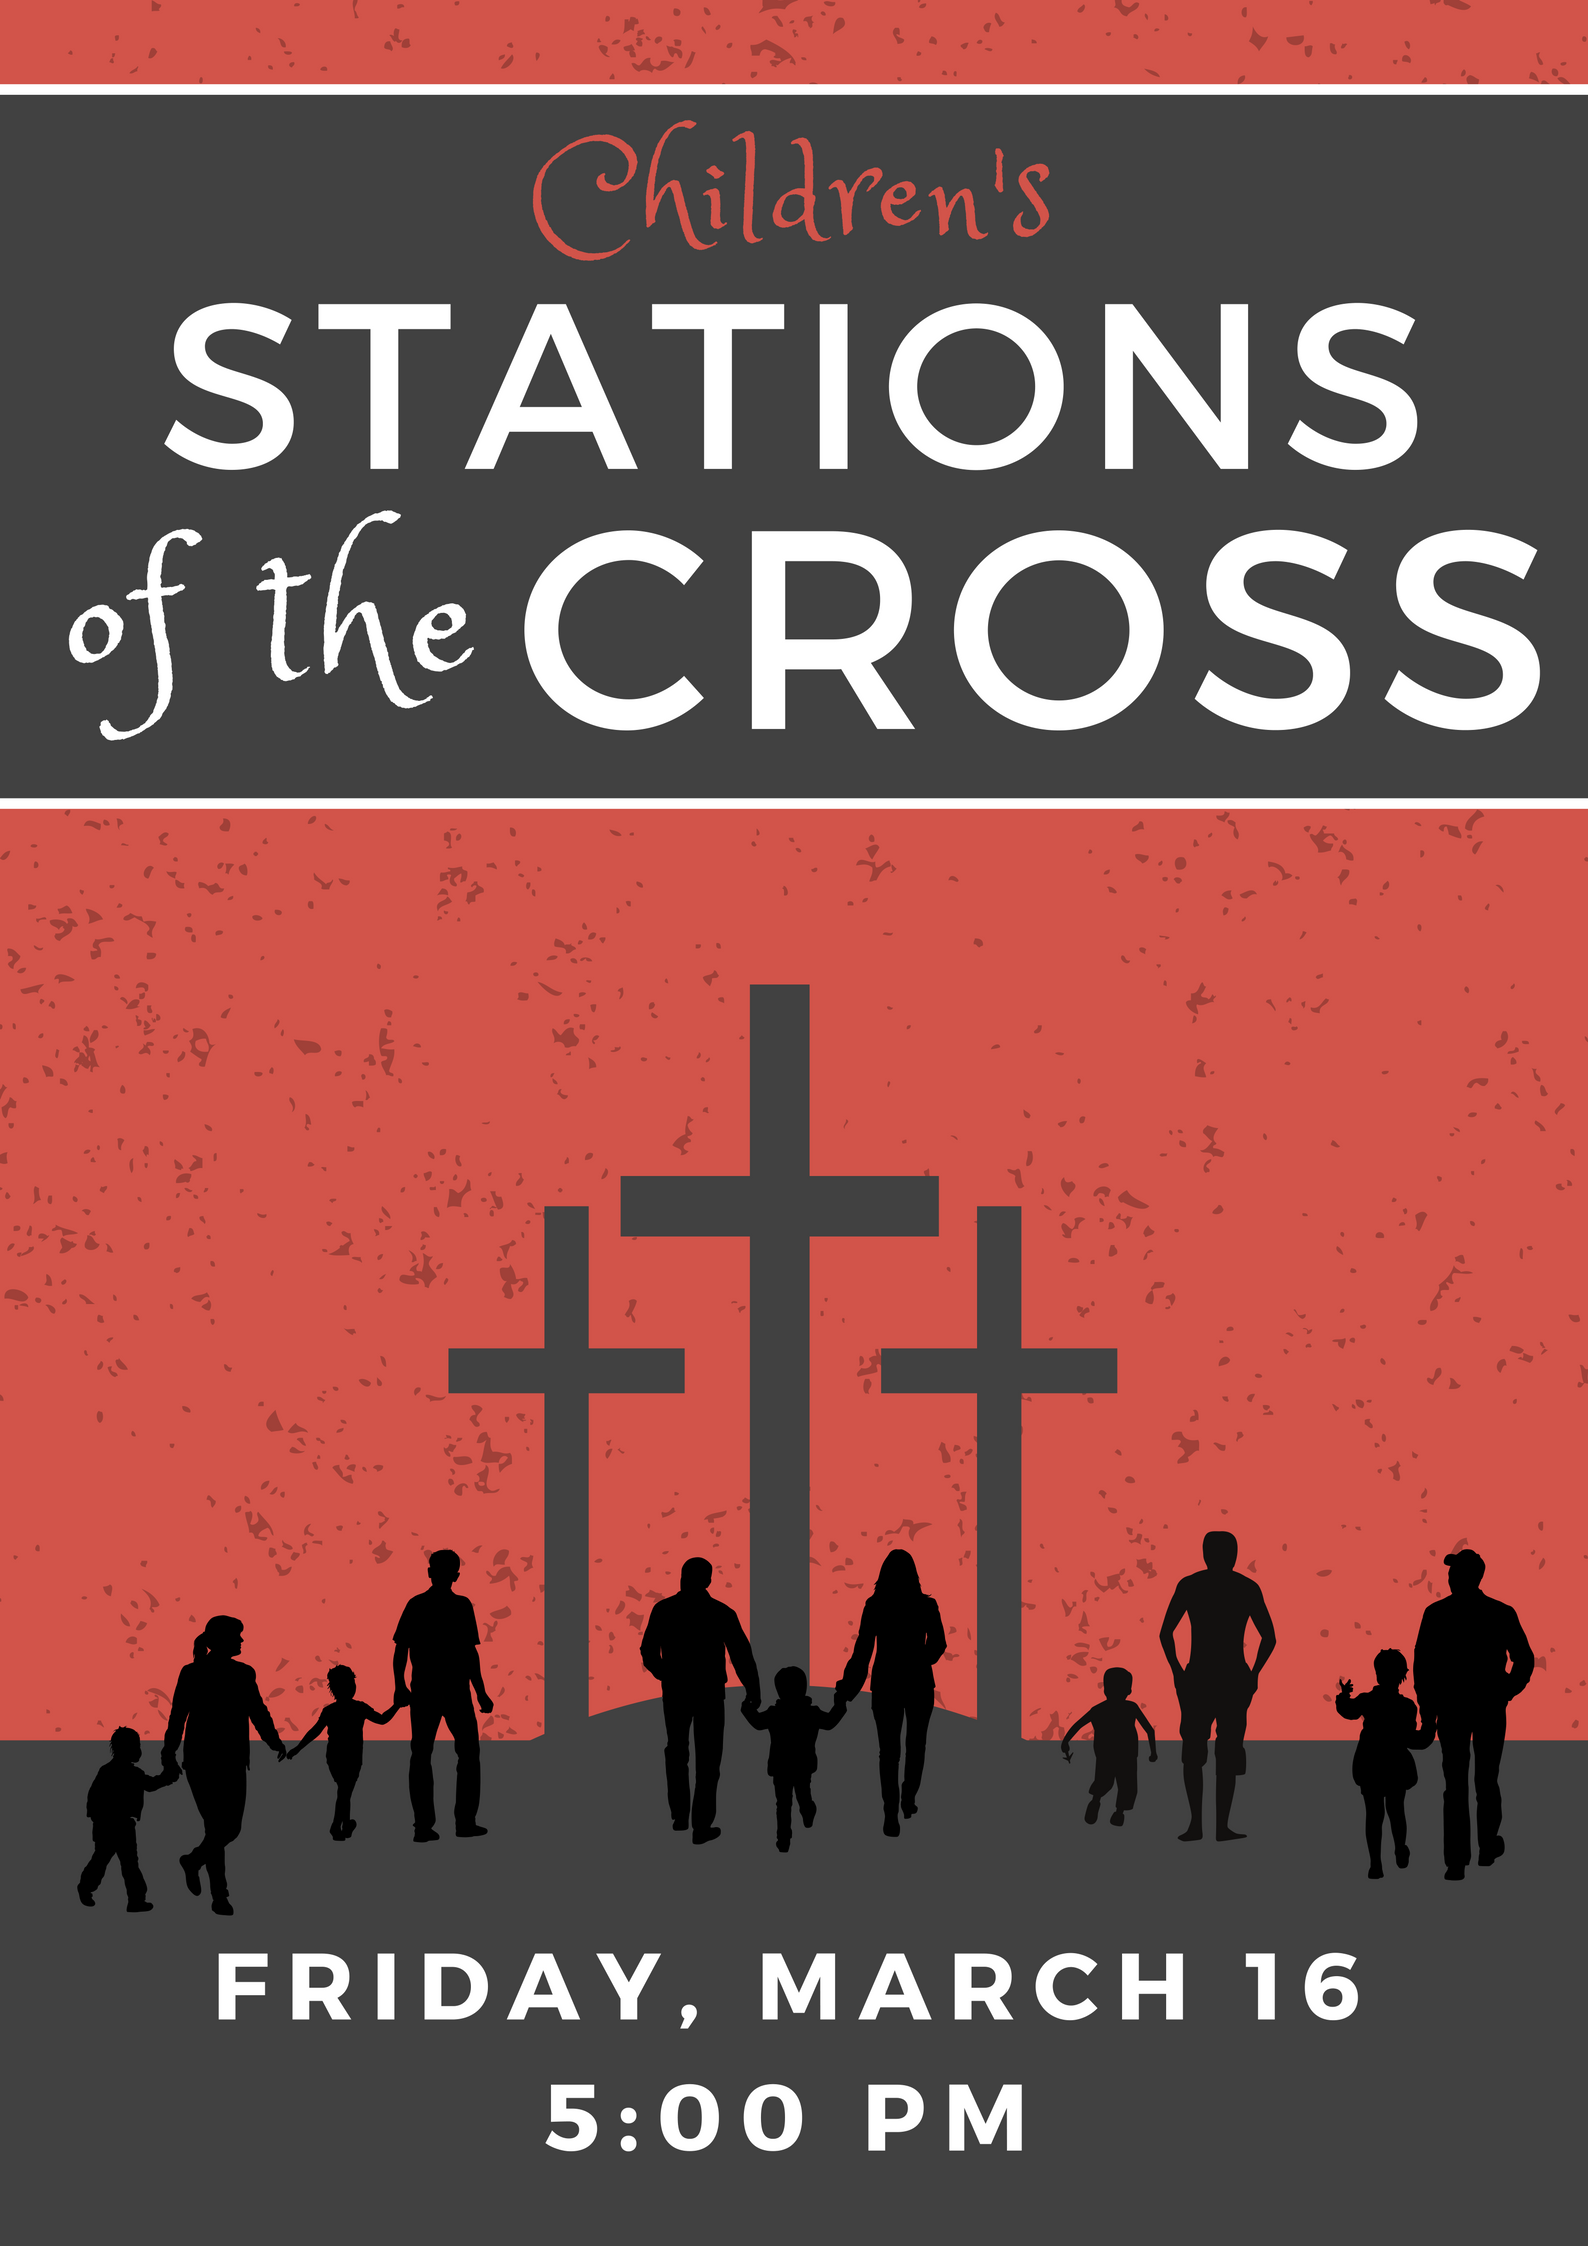 Children's Stations of the Cross (1)